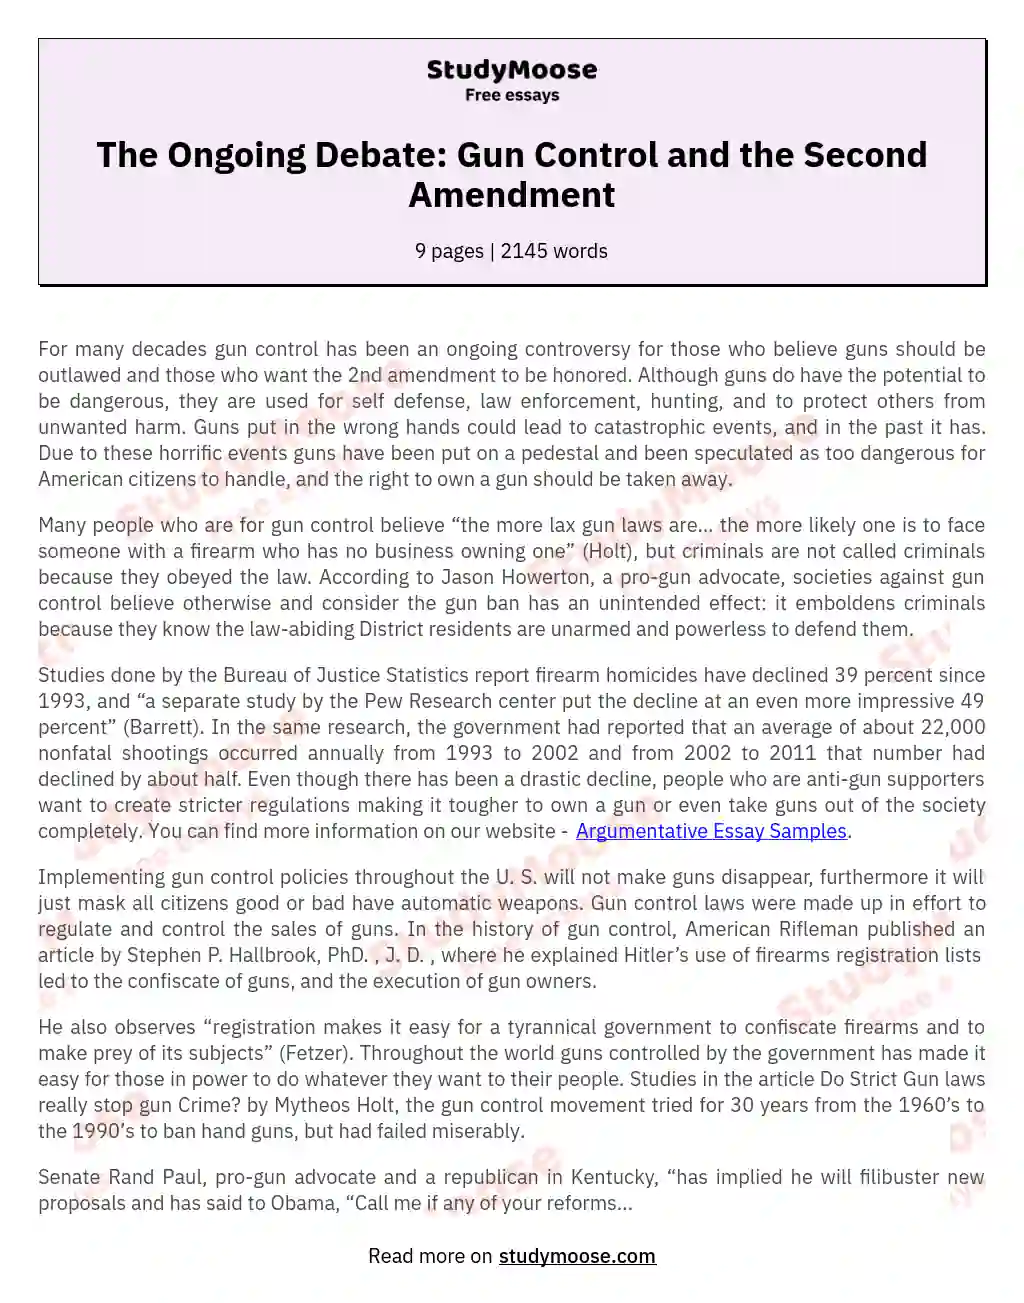 The Ongoing Debate: Gun Control and the Second Amendment essay